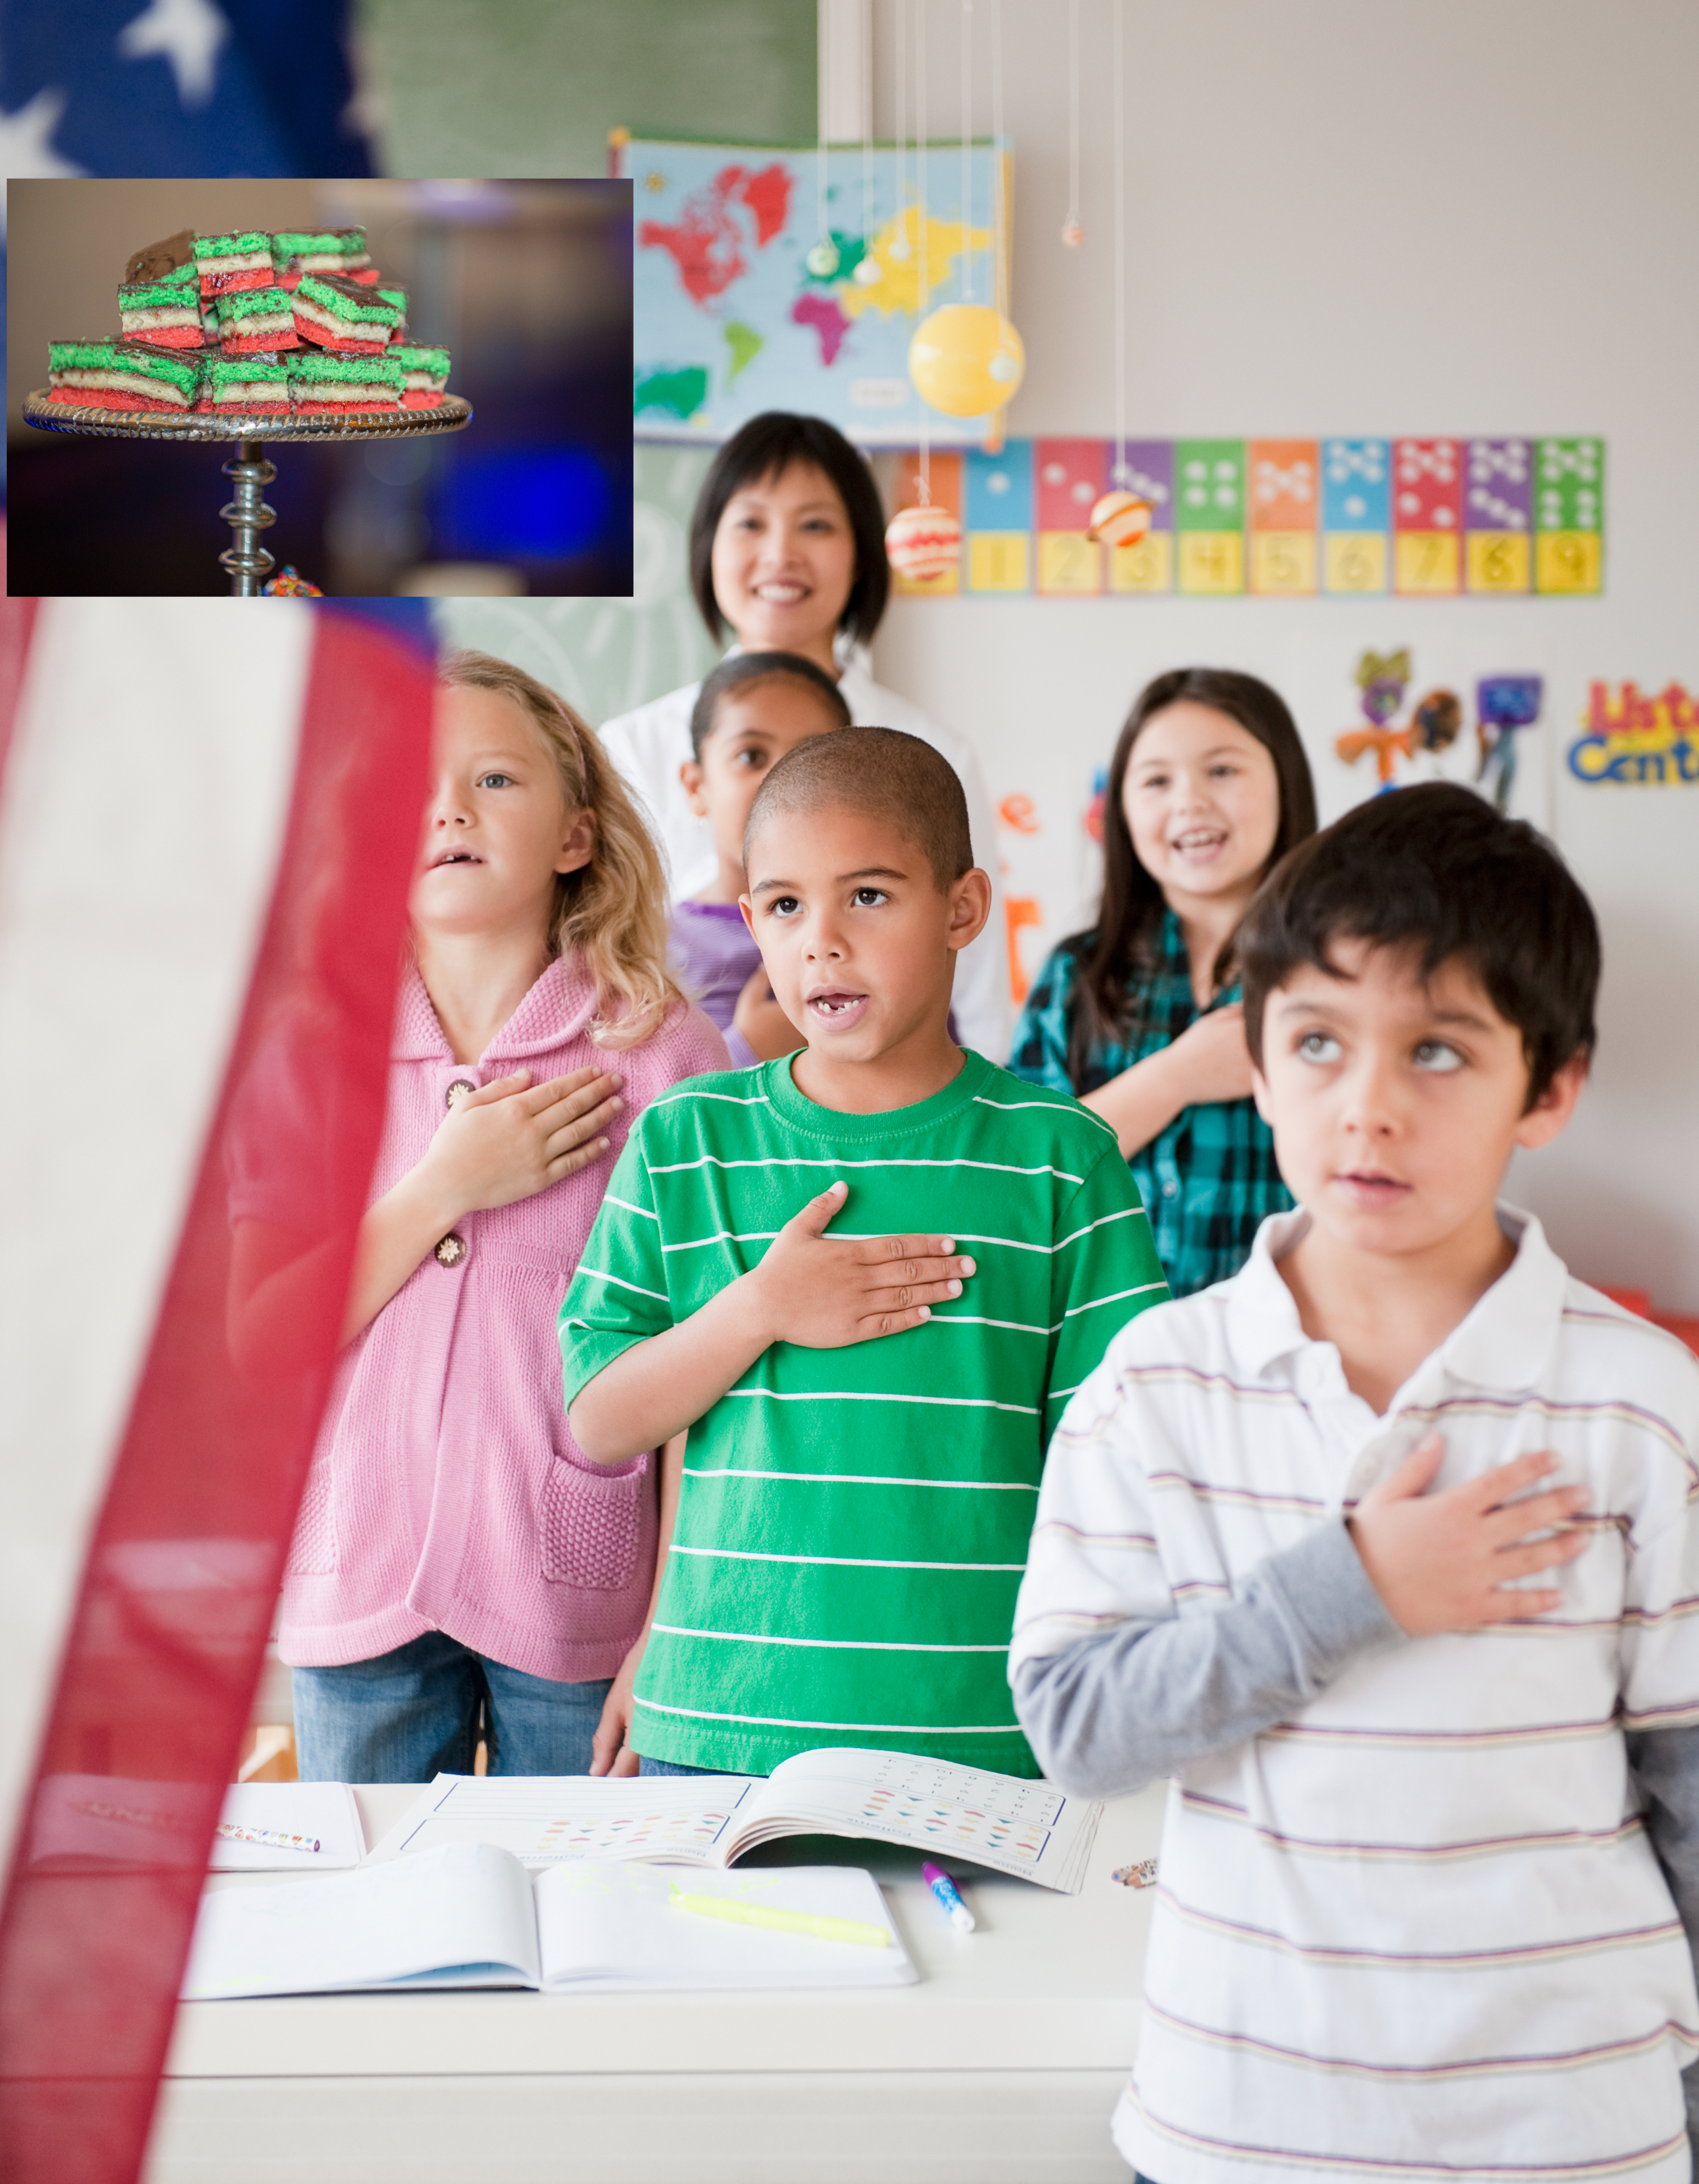 Children in a classroom with hands on hearts, facing the US flag, likely during the Pledge of Allegiance